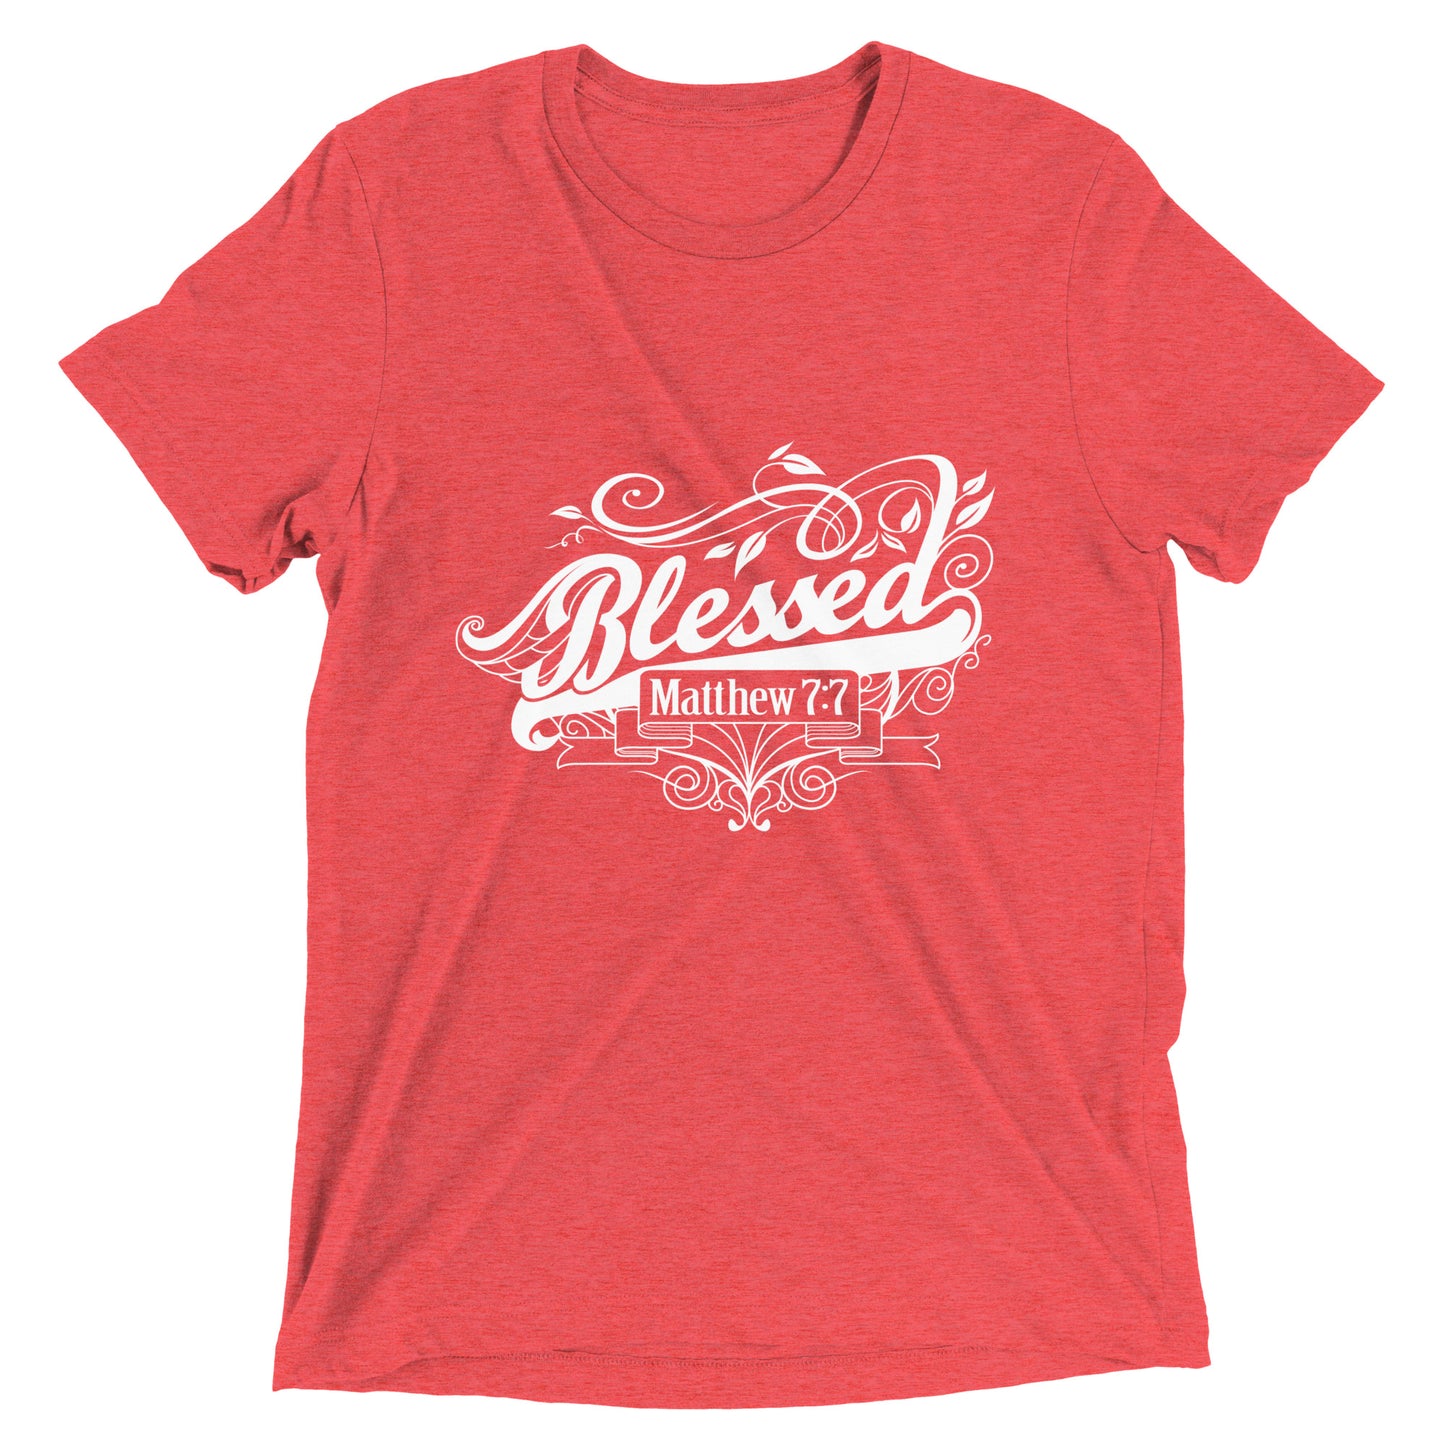 Blessed - Short sleeve t-shirt - View All Colors